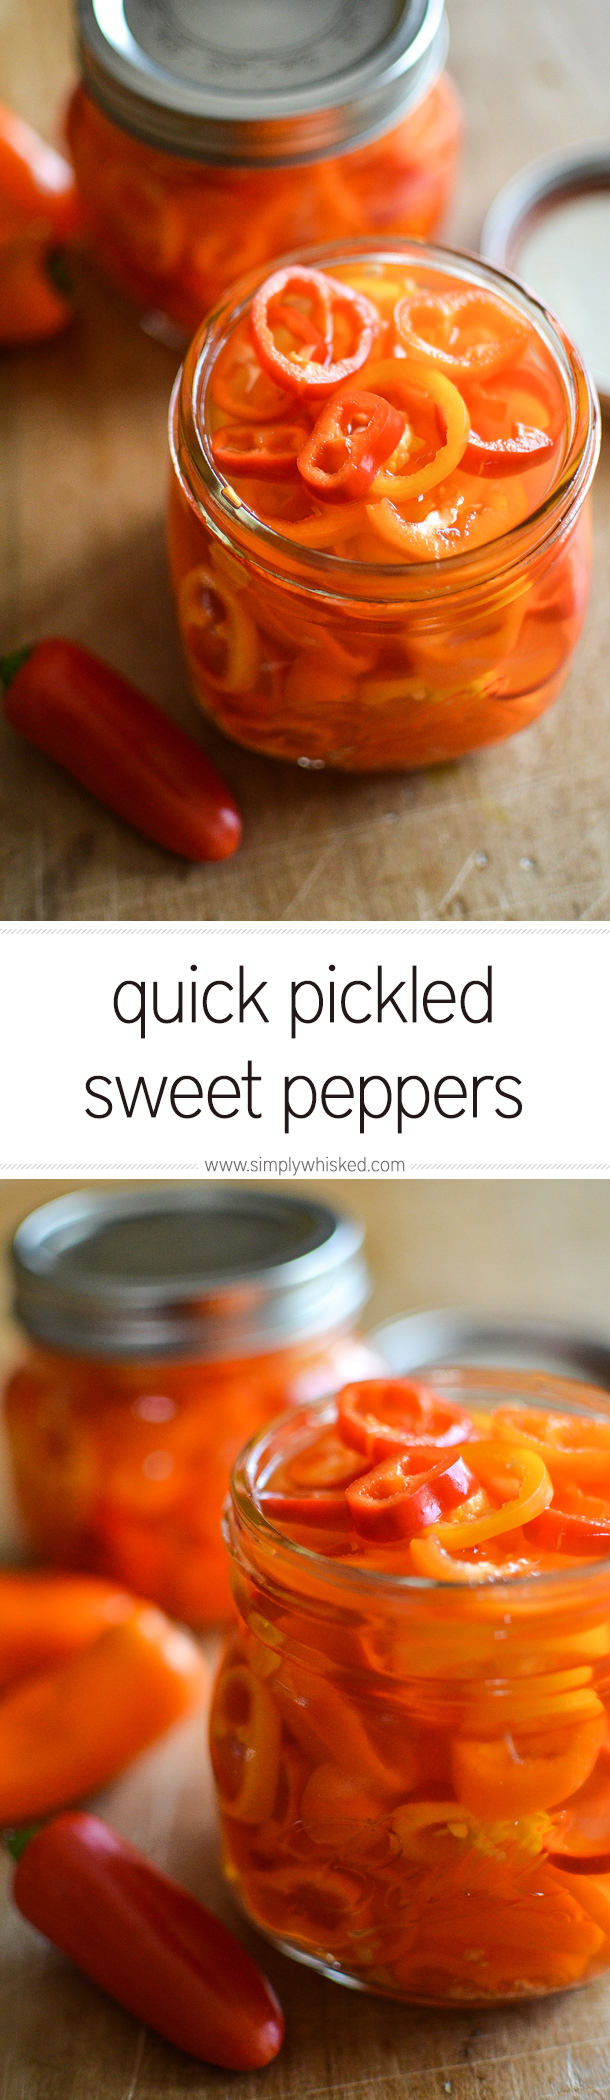 Quick Pickled Sweet Peppers | Homemade Gifts | Pickle Recipe | simplywhisked.com